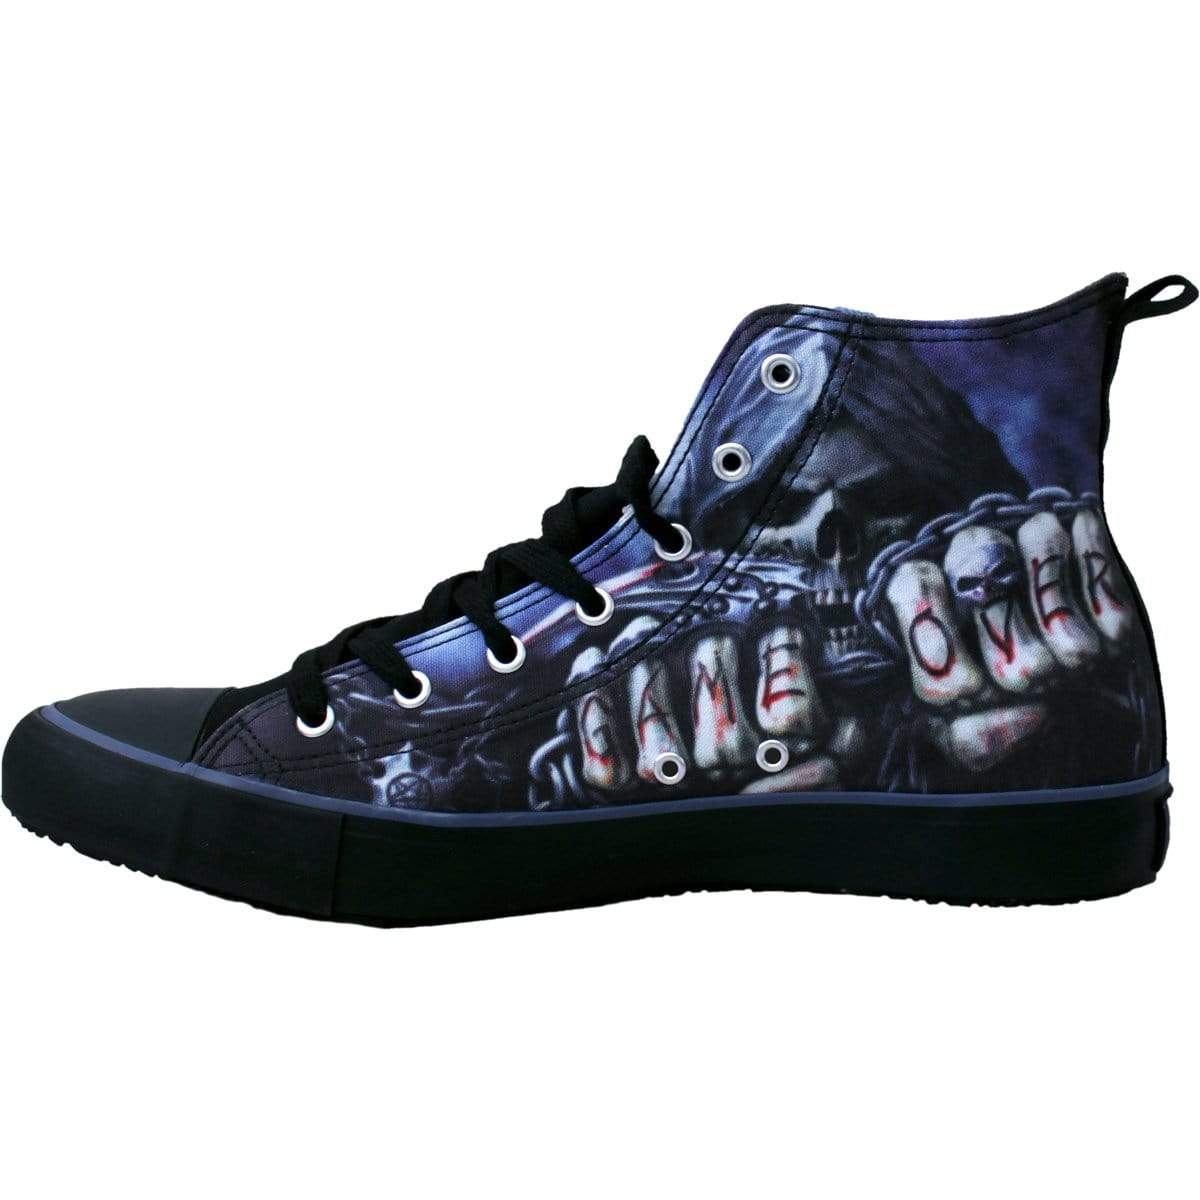 GAME OVER - Sneakers - Men's High Top Laceup